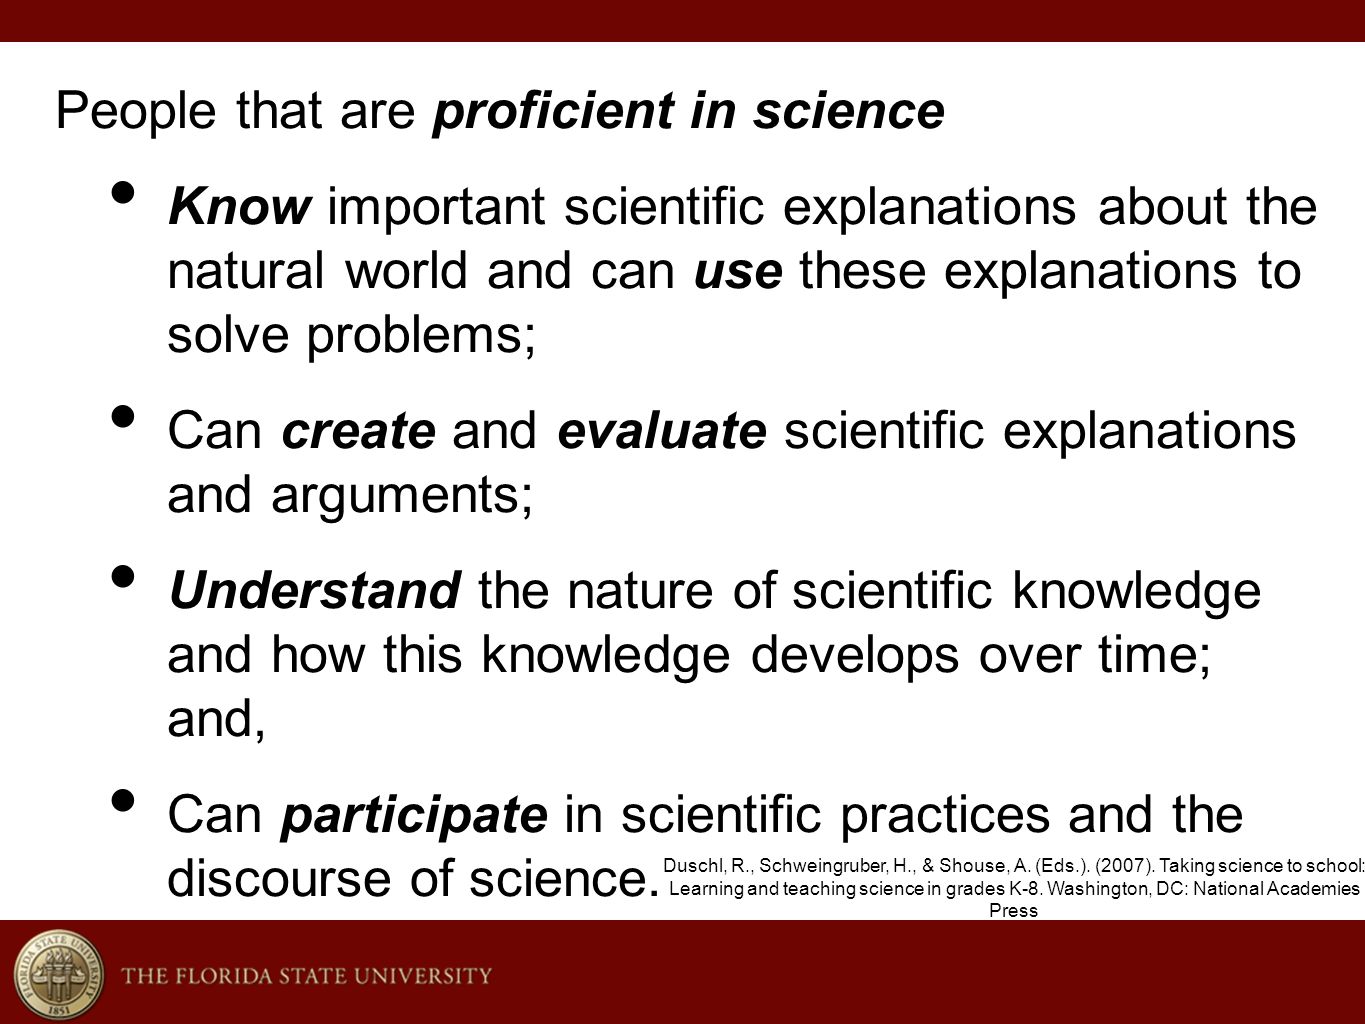 People that are proficient in science Know important scientific explanations about the natural world and can use these explanations to solve problems; Can create and evaluate scientific explanations and arguments; Understand the nature of scientific knowledge and how this knowledge develops over time; and, Can participate in scientific practices and the discourse of science.